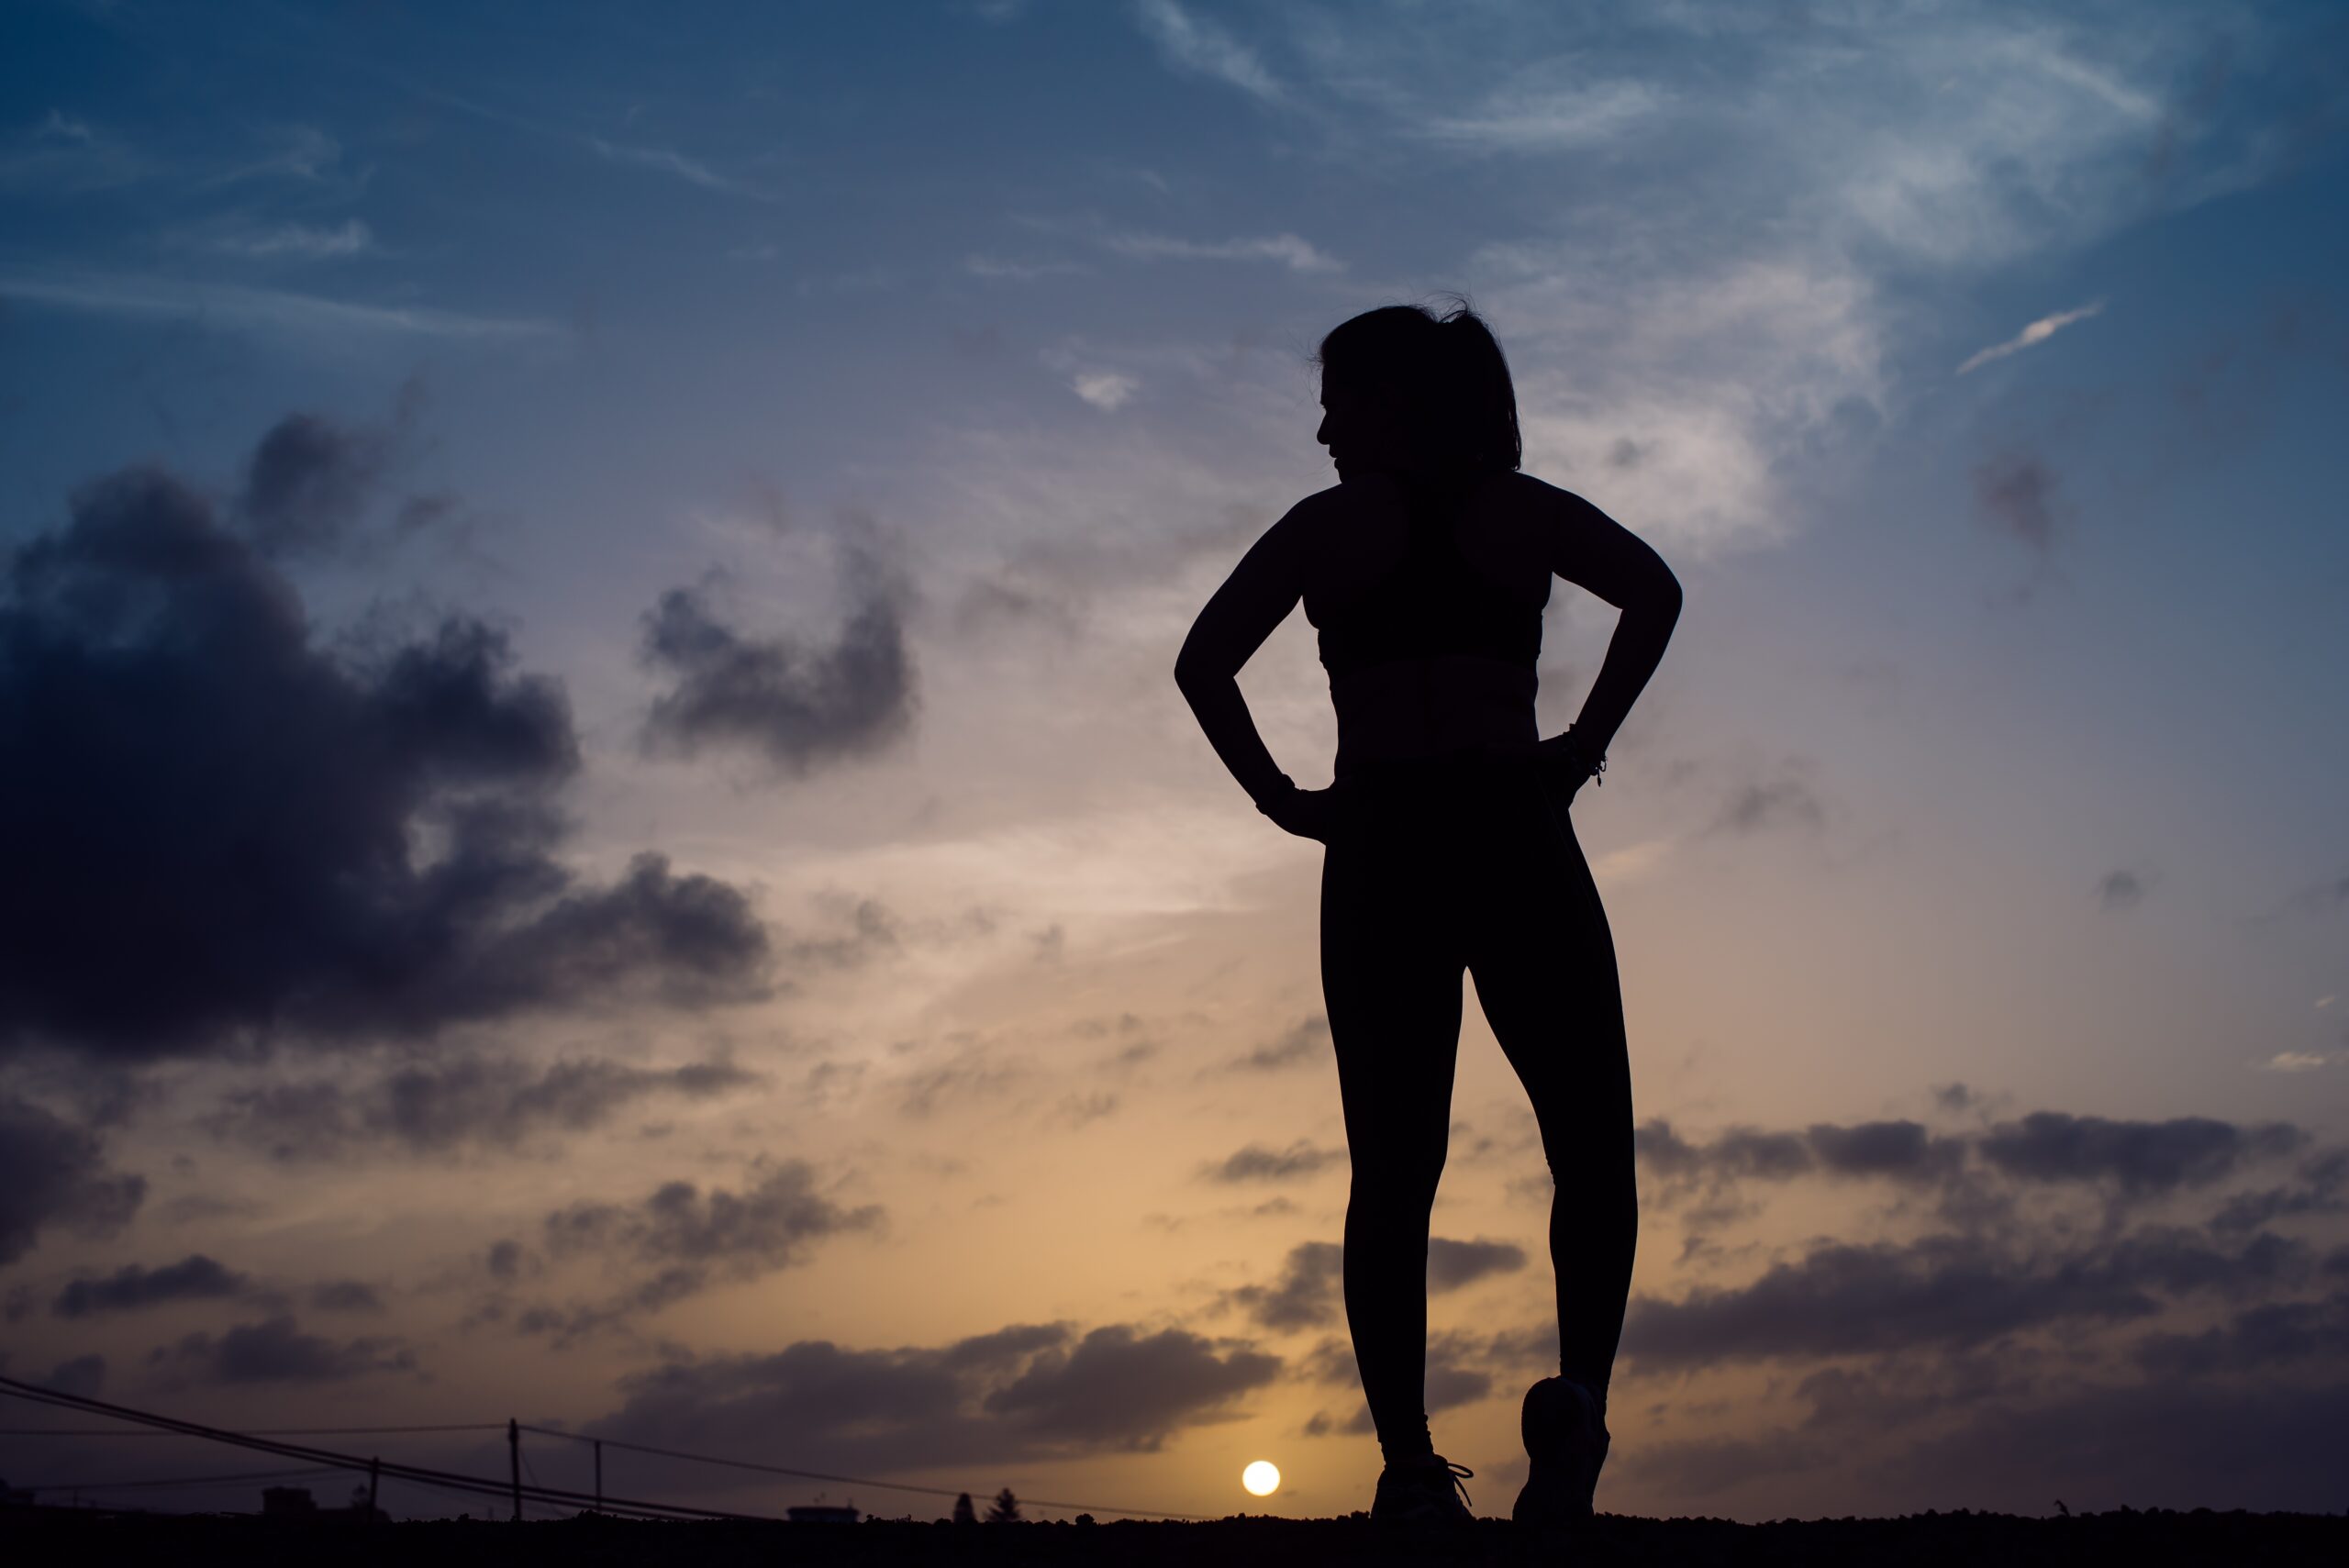 Silhouette of a woman against a sunset sky, symbolizing the interplay of discipline and recovery in her journey towards renewal.